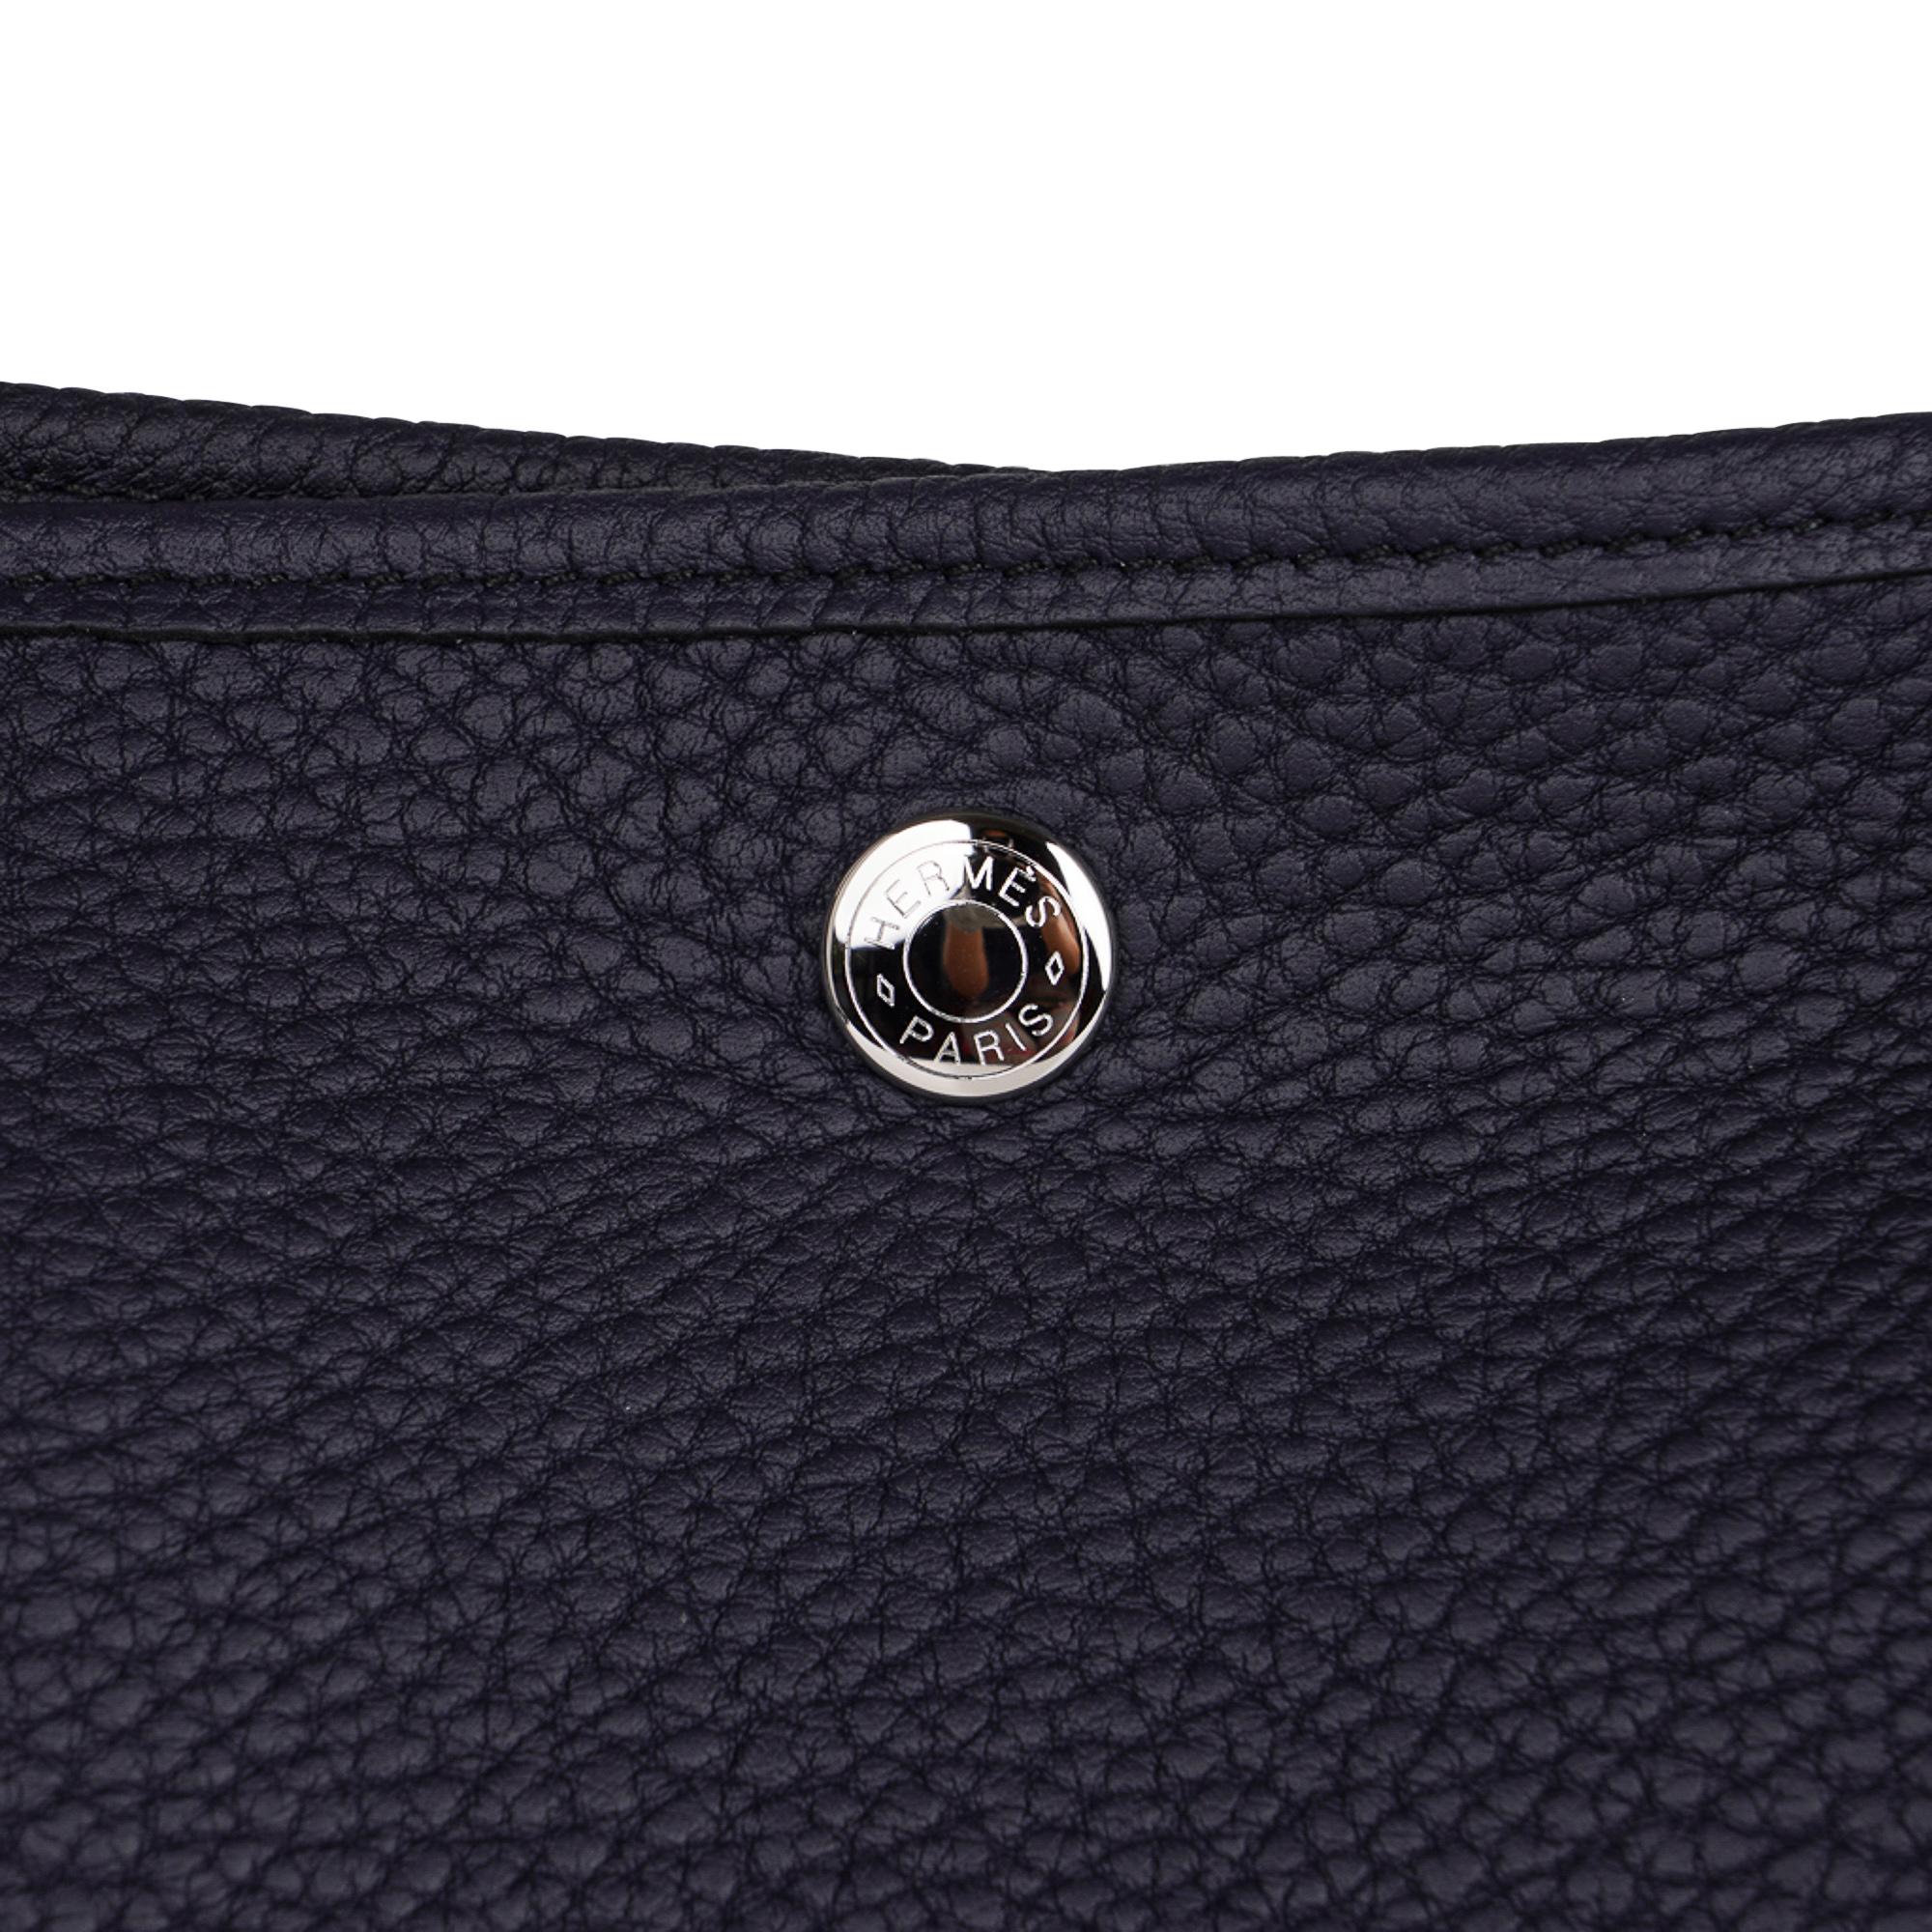 Mightychic offers a guaranteed authentic Hermes Garden Party 36 Pockets bag featured in Blue Indigo.
This rich colour is accentuated in plush Negonda leather.
Fresh palladium Clou de Selle hardware.
Herringbone canvas lining and interior zipper